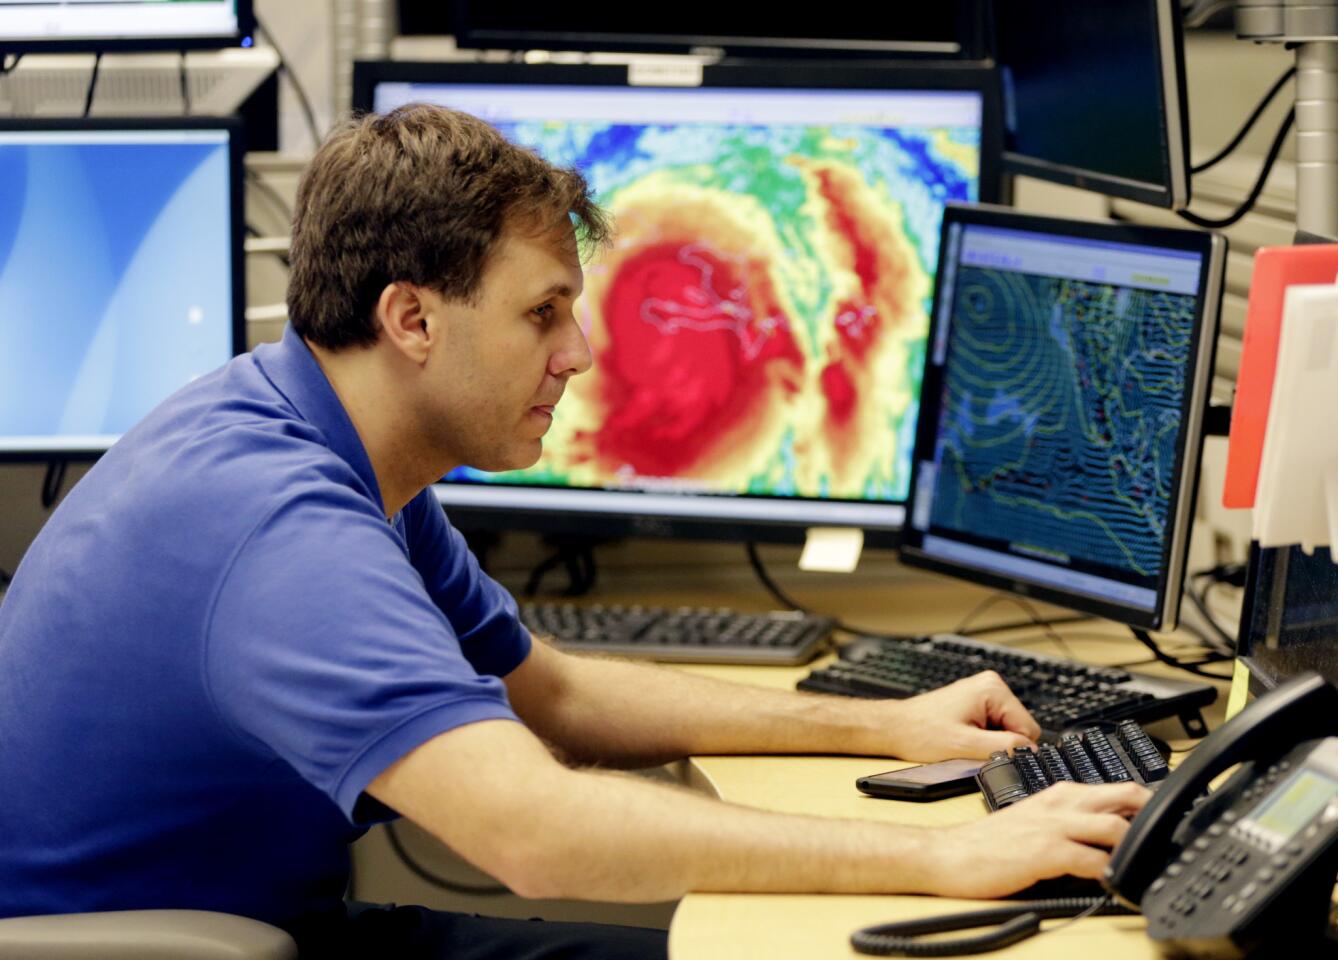 Hurricane specialist Eric Blake monitors the path of Hurricane Matthew at the National Hurricane Center in Miami on Oct. 4, 2016.